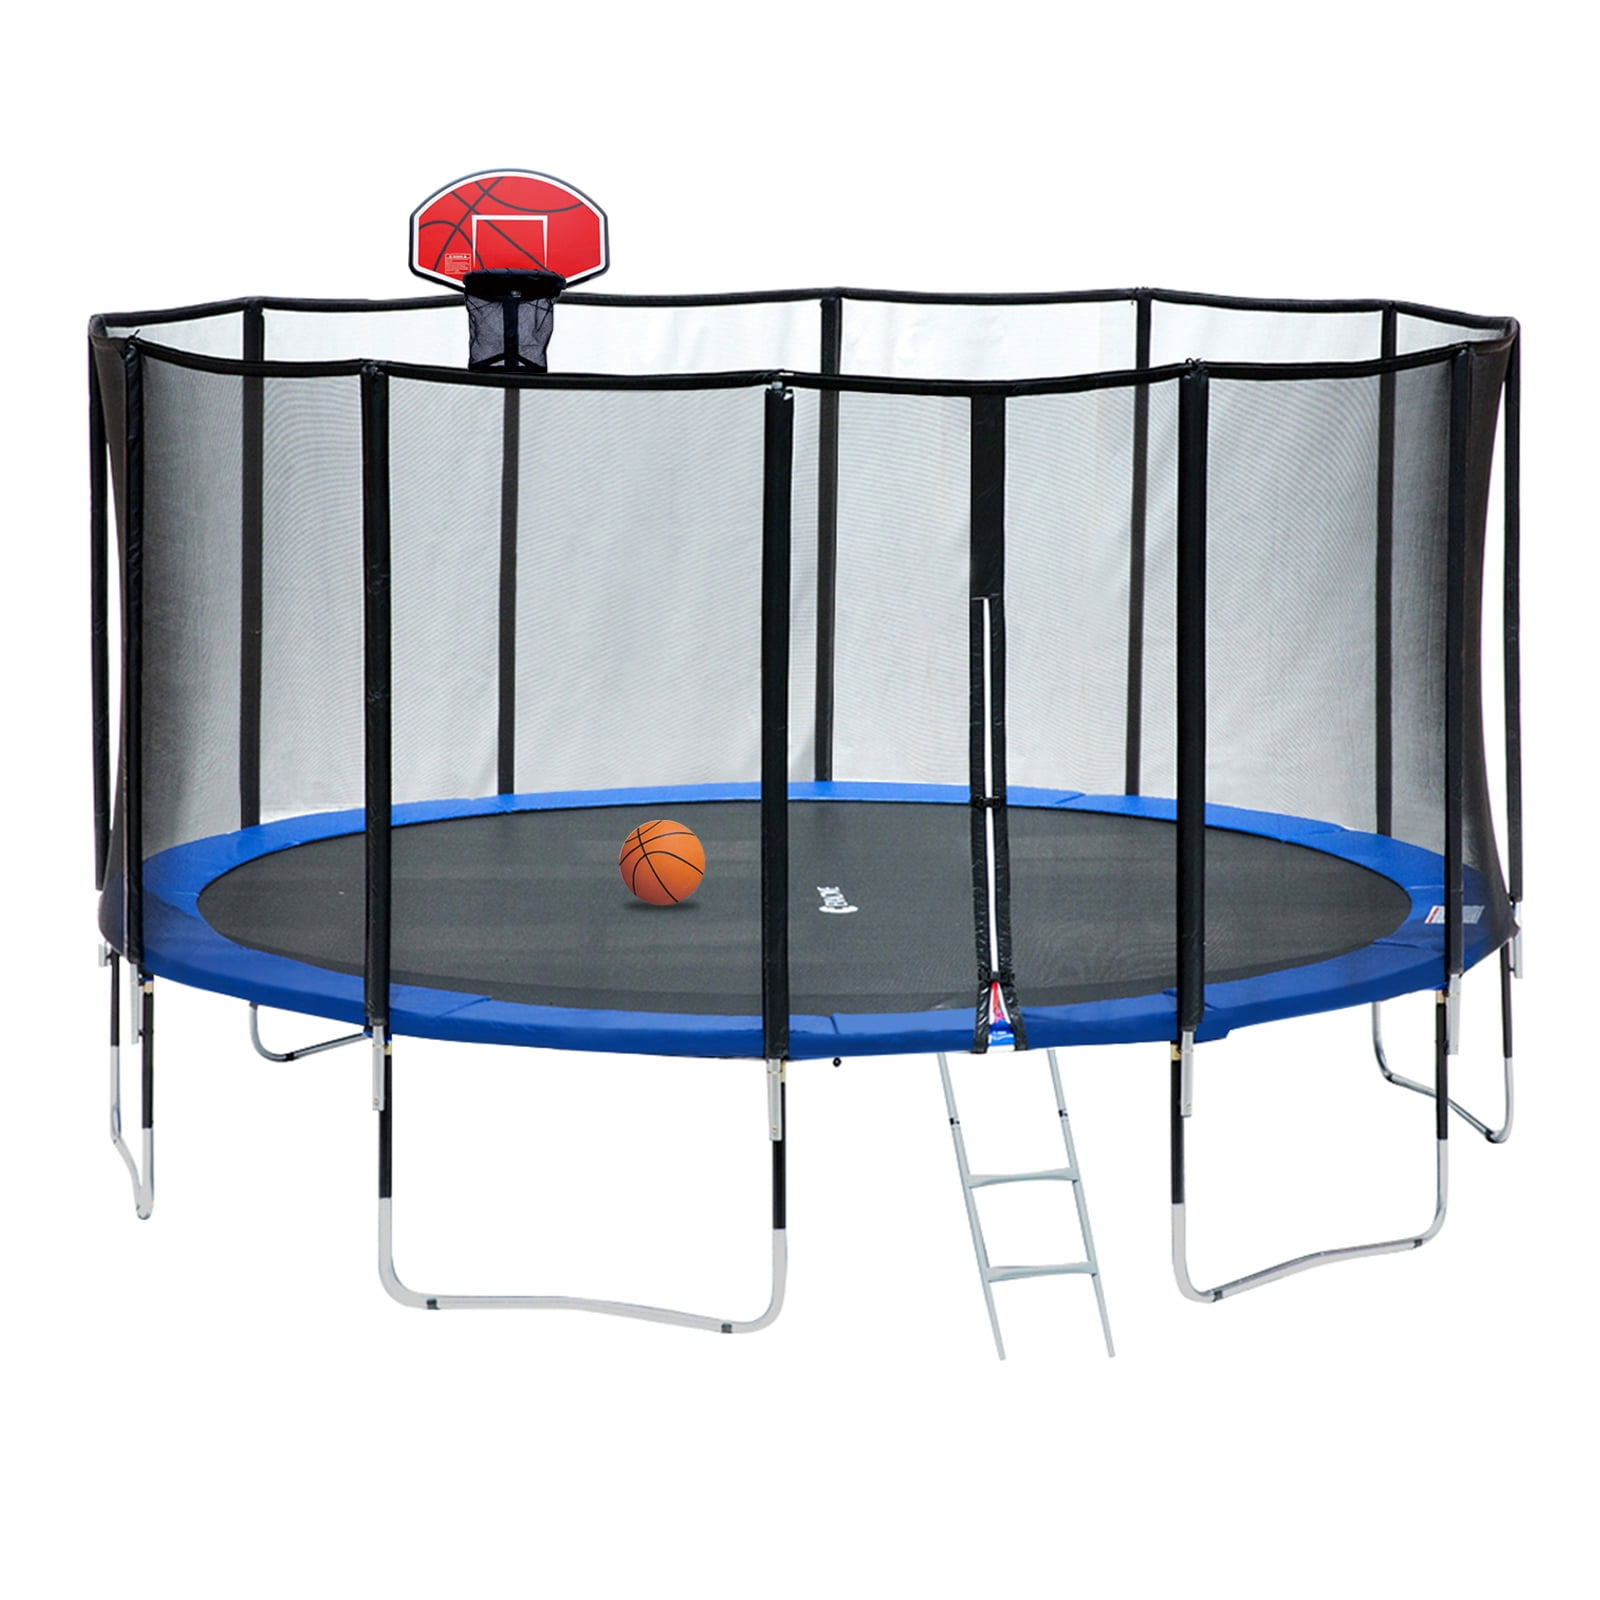 Exacme 15 FT Round Trampoline with 400 LBS Weight Limit&Upgraded Carbon Fiber Support Pole With Orange Basketball Hoop